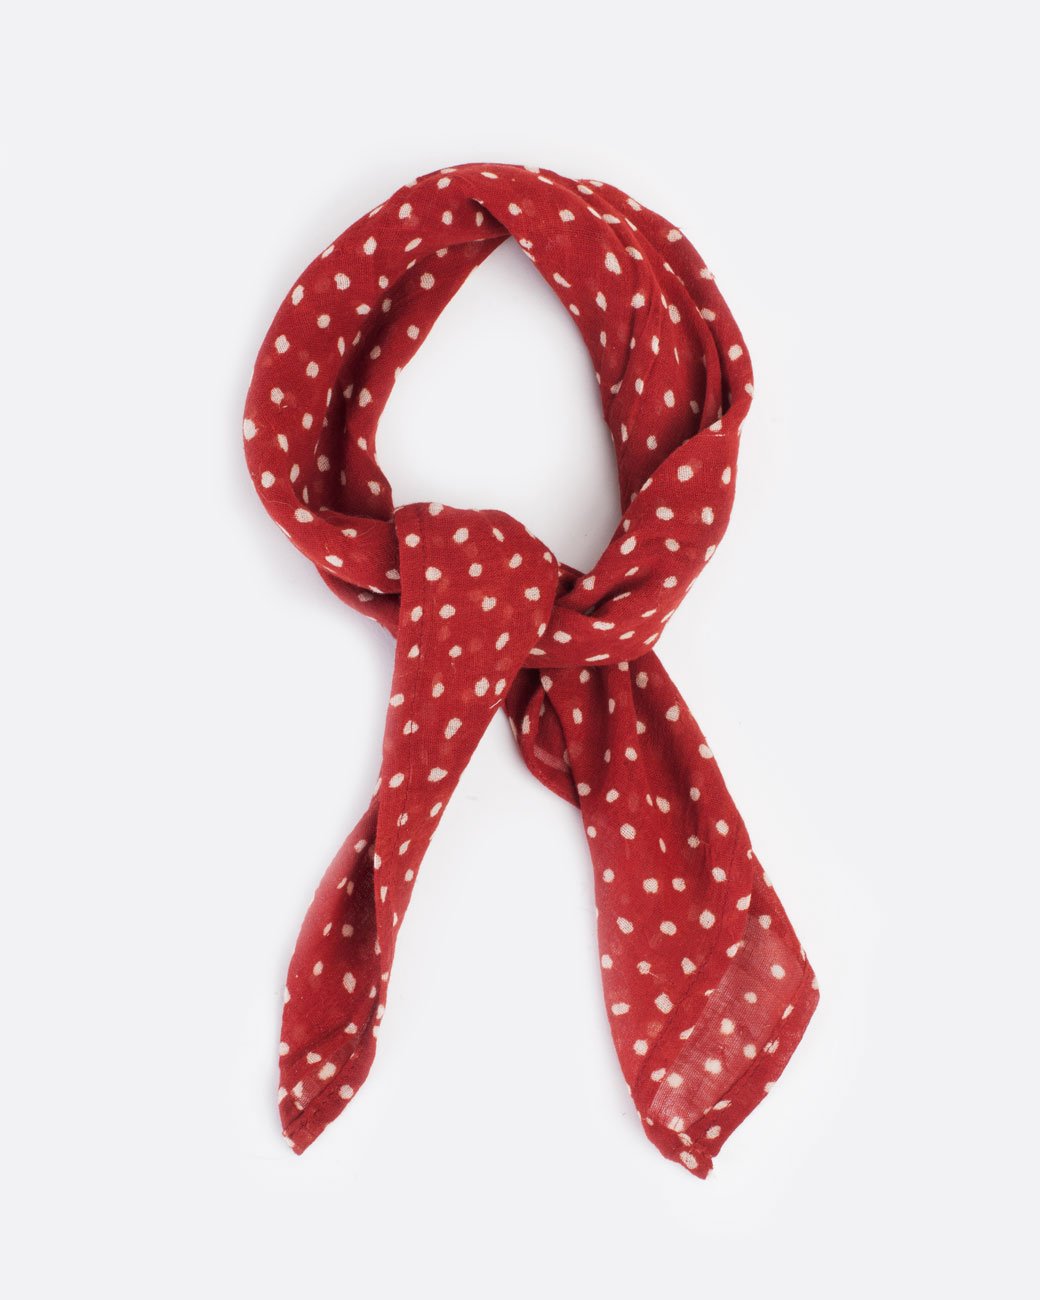 Red bandana with white polka dots, shown tied.